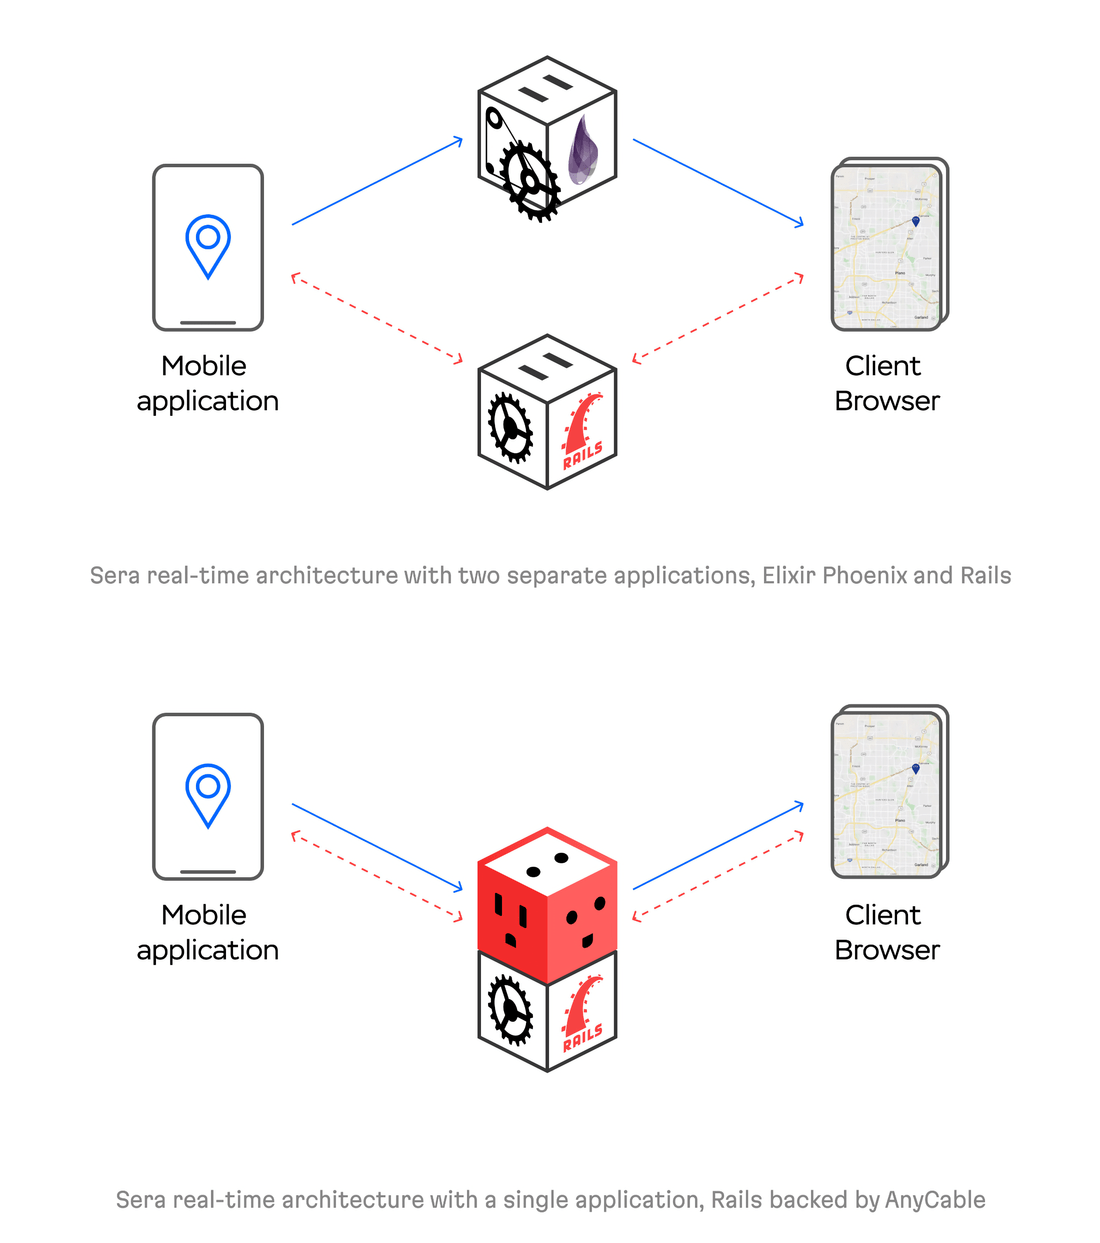 Sera real-time architecture before and after